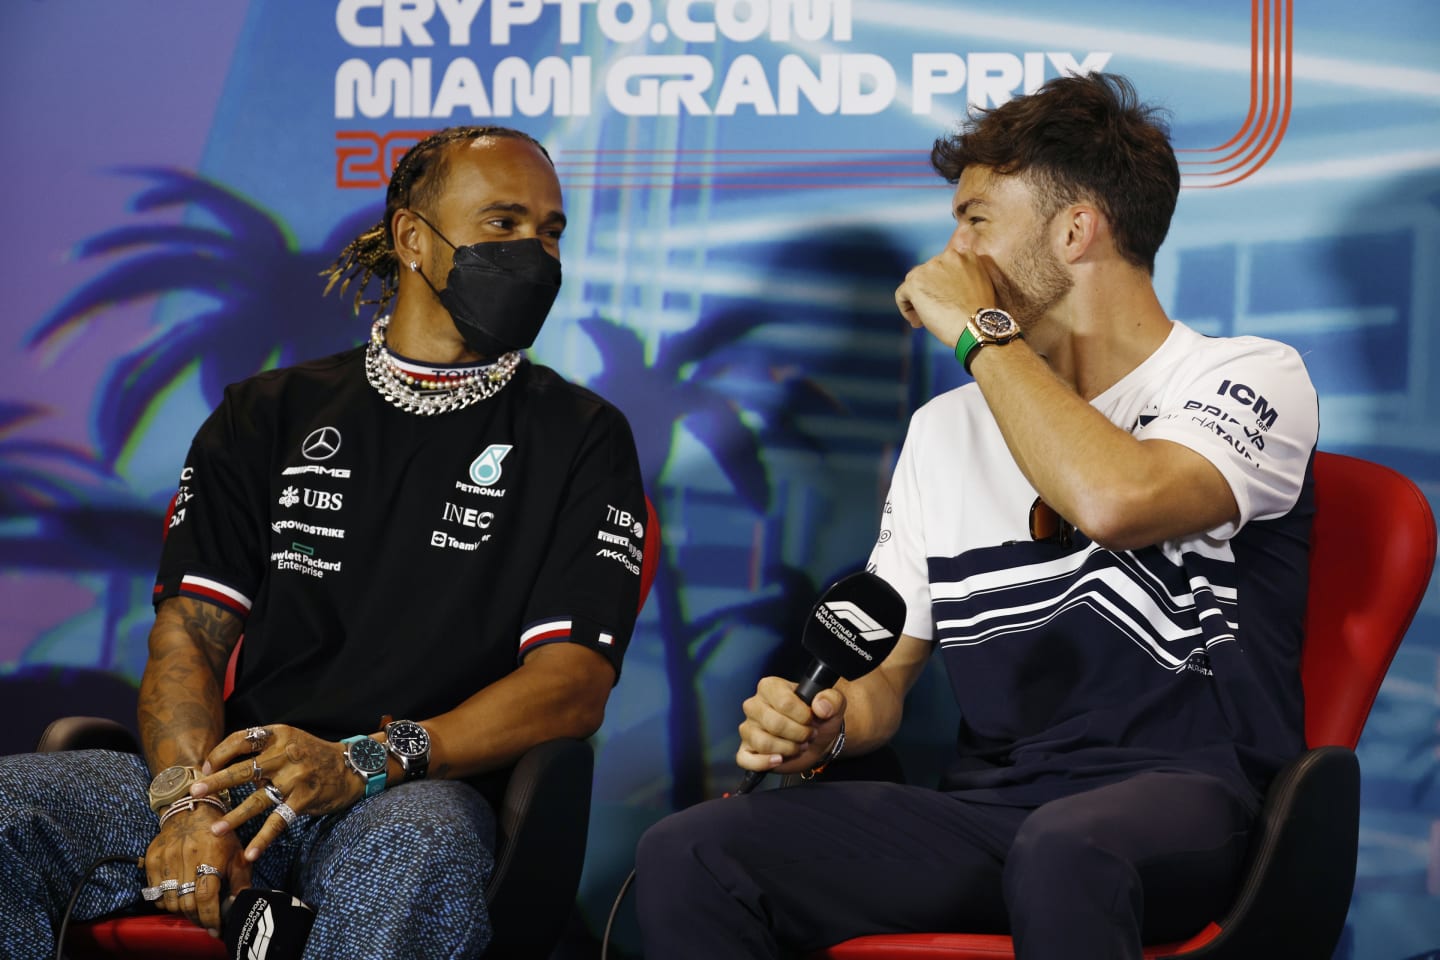 MIAMI, FLORIDA - MAY 06: Lewis Hamilton of Great Britain and Mercedes and Pierre Gasly of France and Scuderia AlphaTauri talk in the Drivers Press Conference prior to practice ahead of the F1 Grand Prix of Miami at the Miami International Autodrome on May 06, 2022 in Miami, Florida. (Photo by Jared C. Tilton/Getty Images)